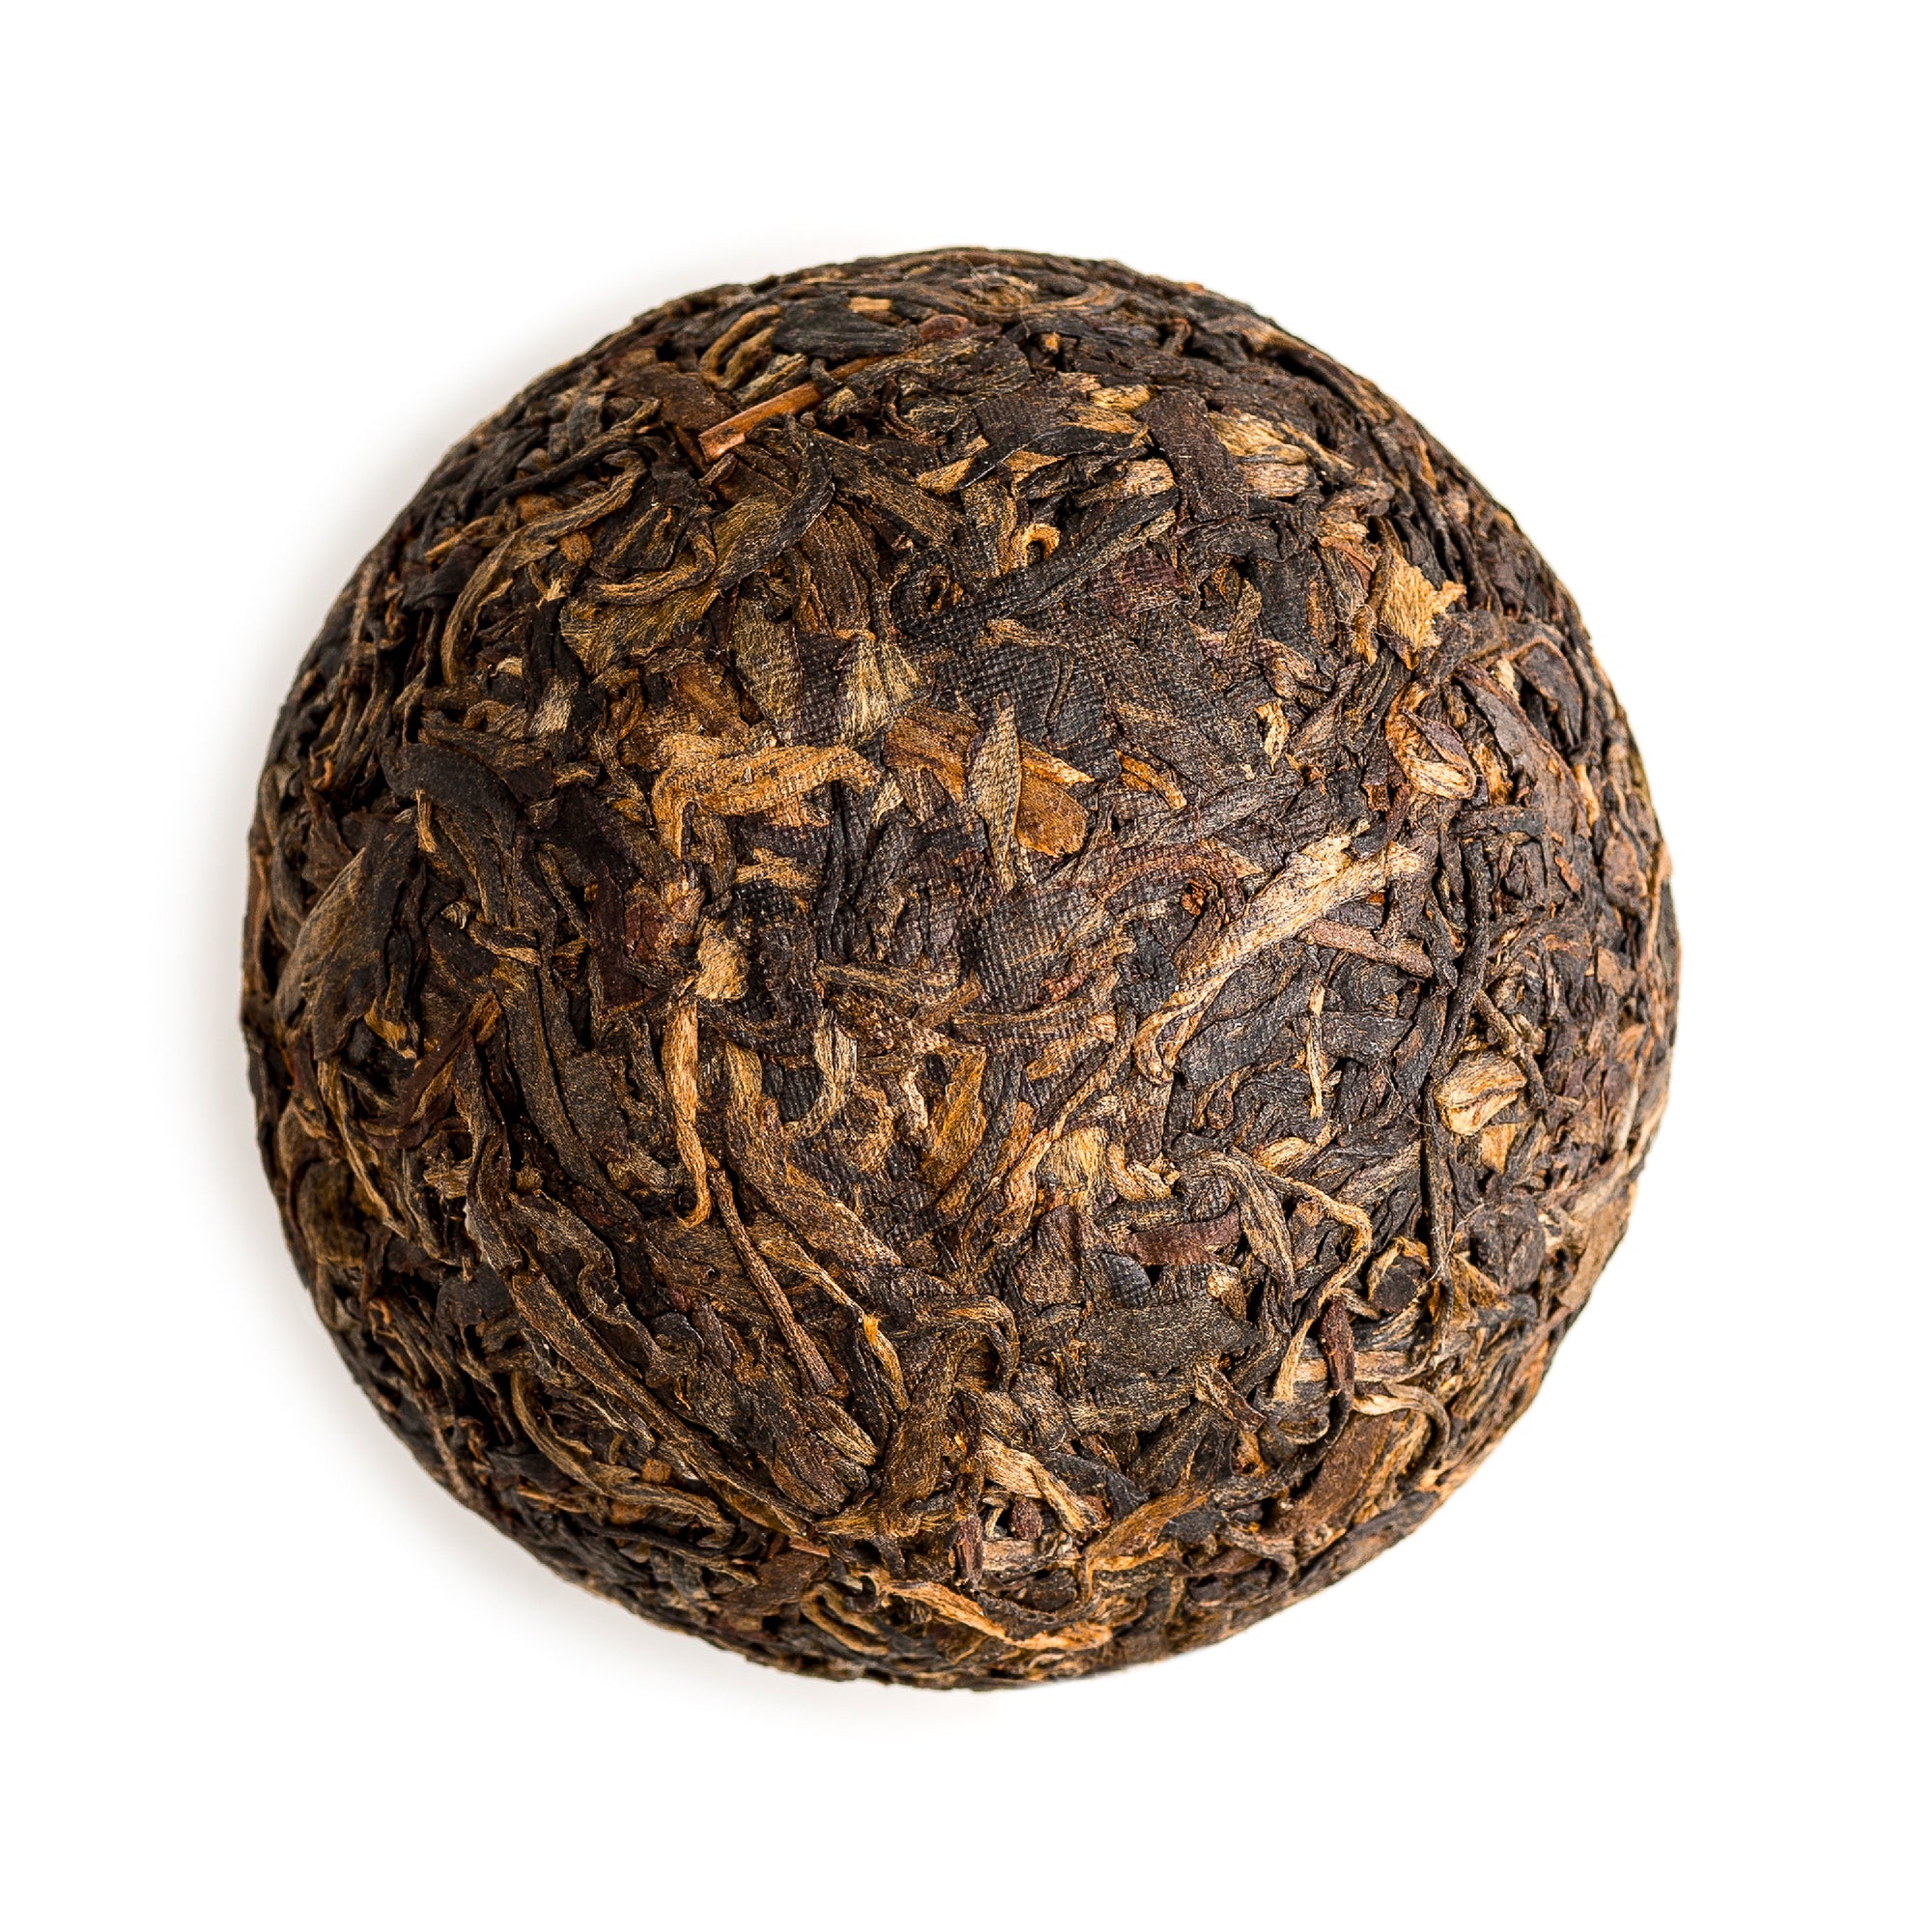 Toucha Pu-Erh Thee Yunnan China - Tou Cha Vogelnest Geperste Chinese Puer Thee 